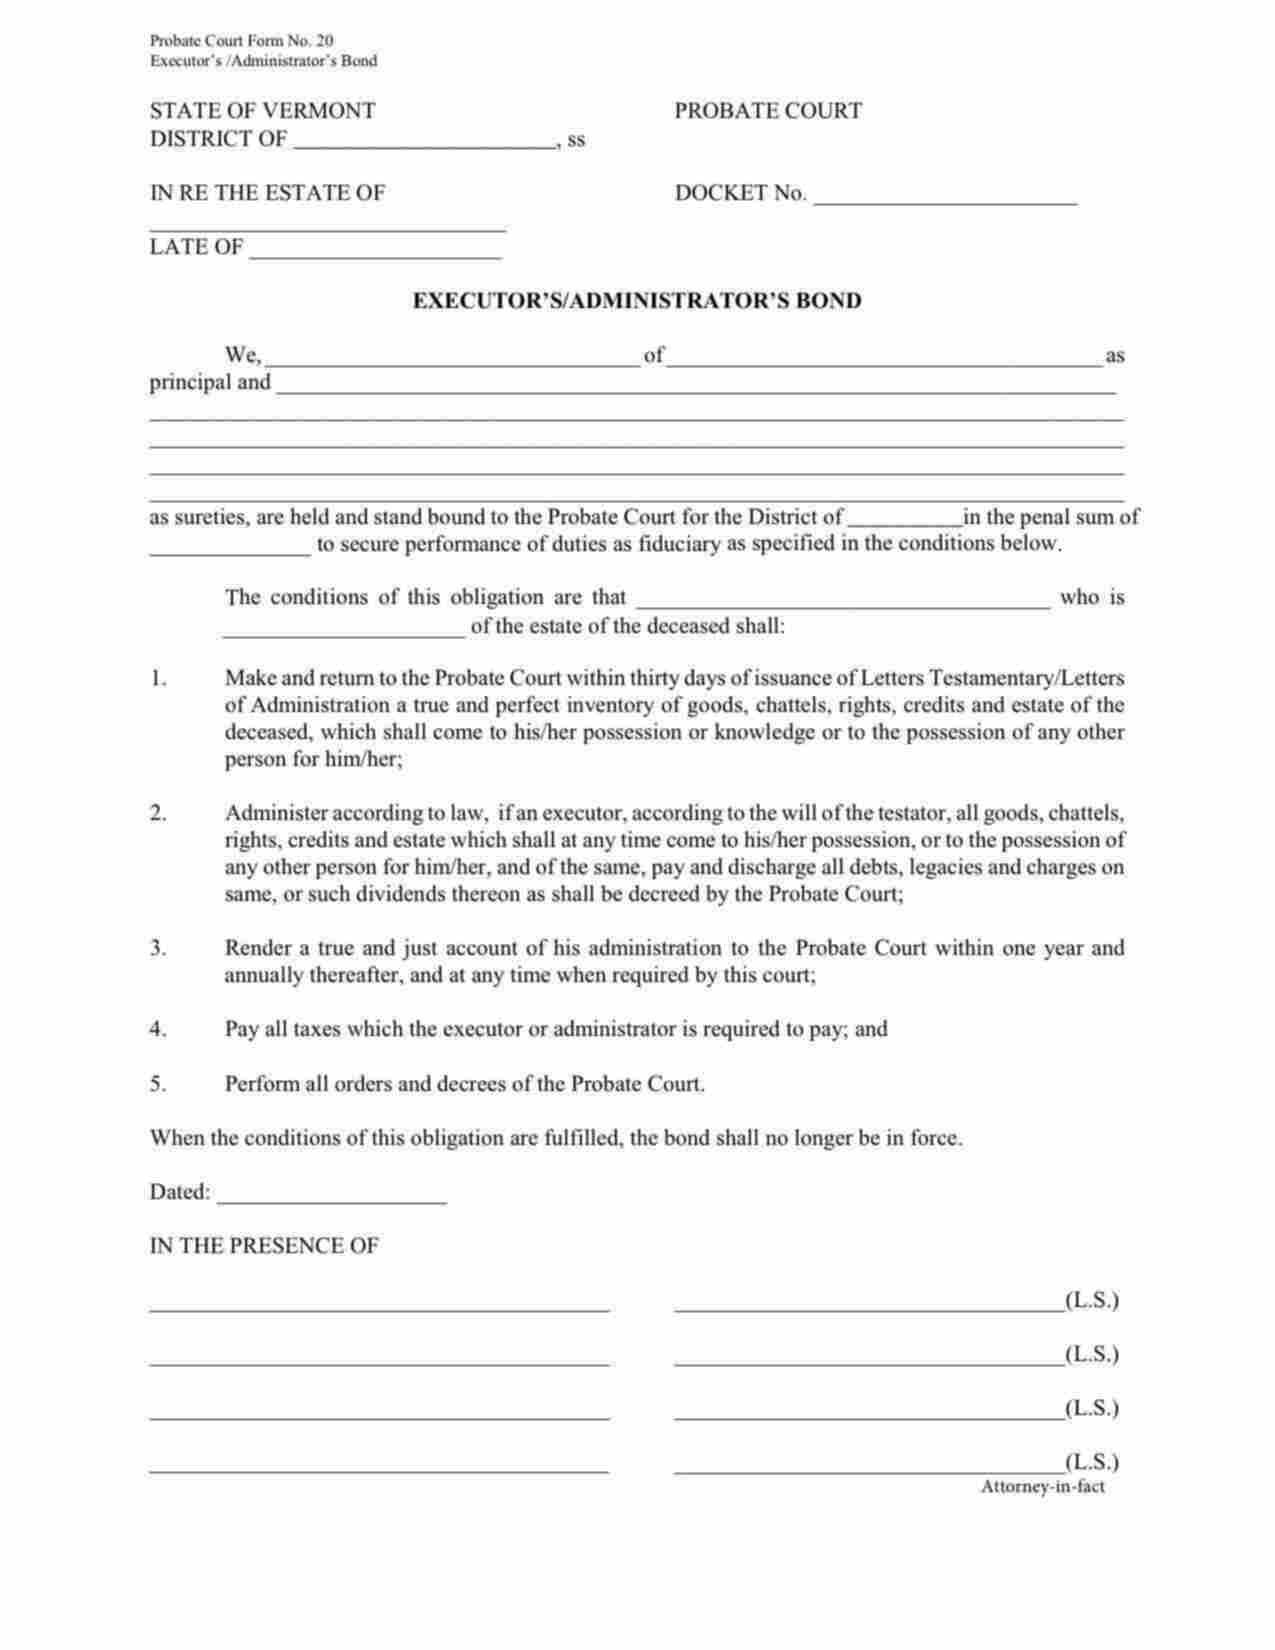 Vermont Probate Administrator, Executor, Conservator, or Guardian Bond Form